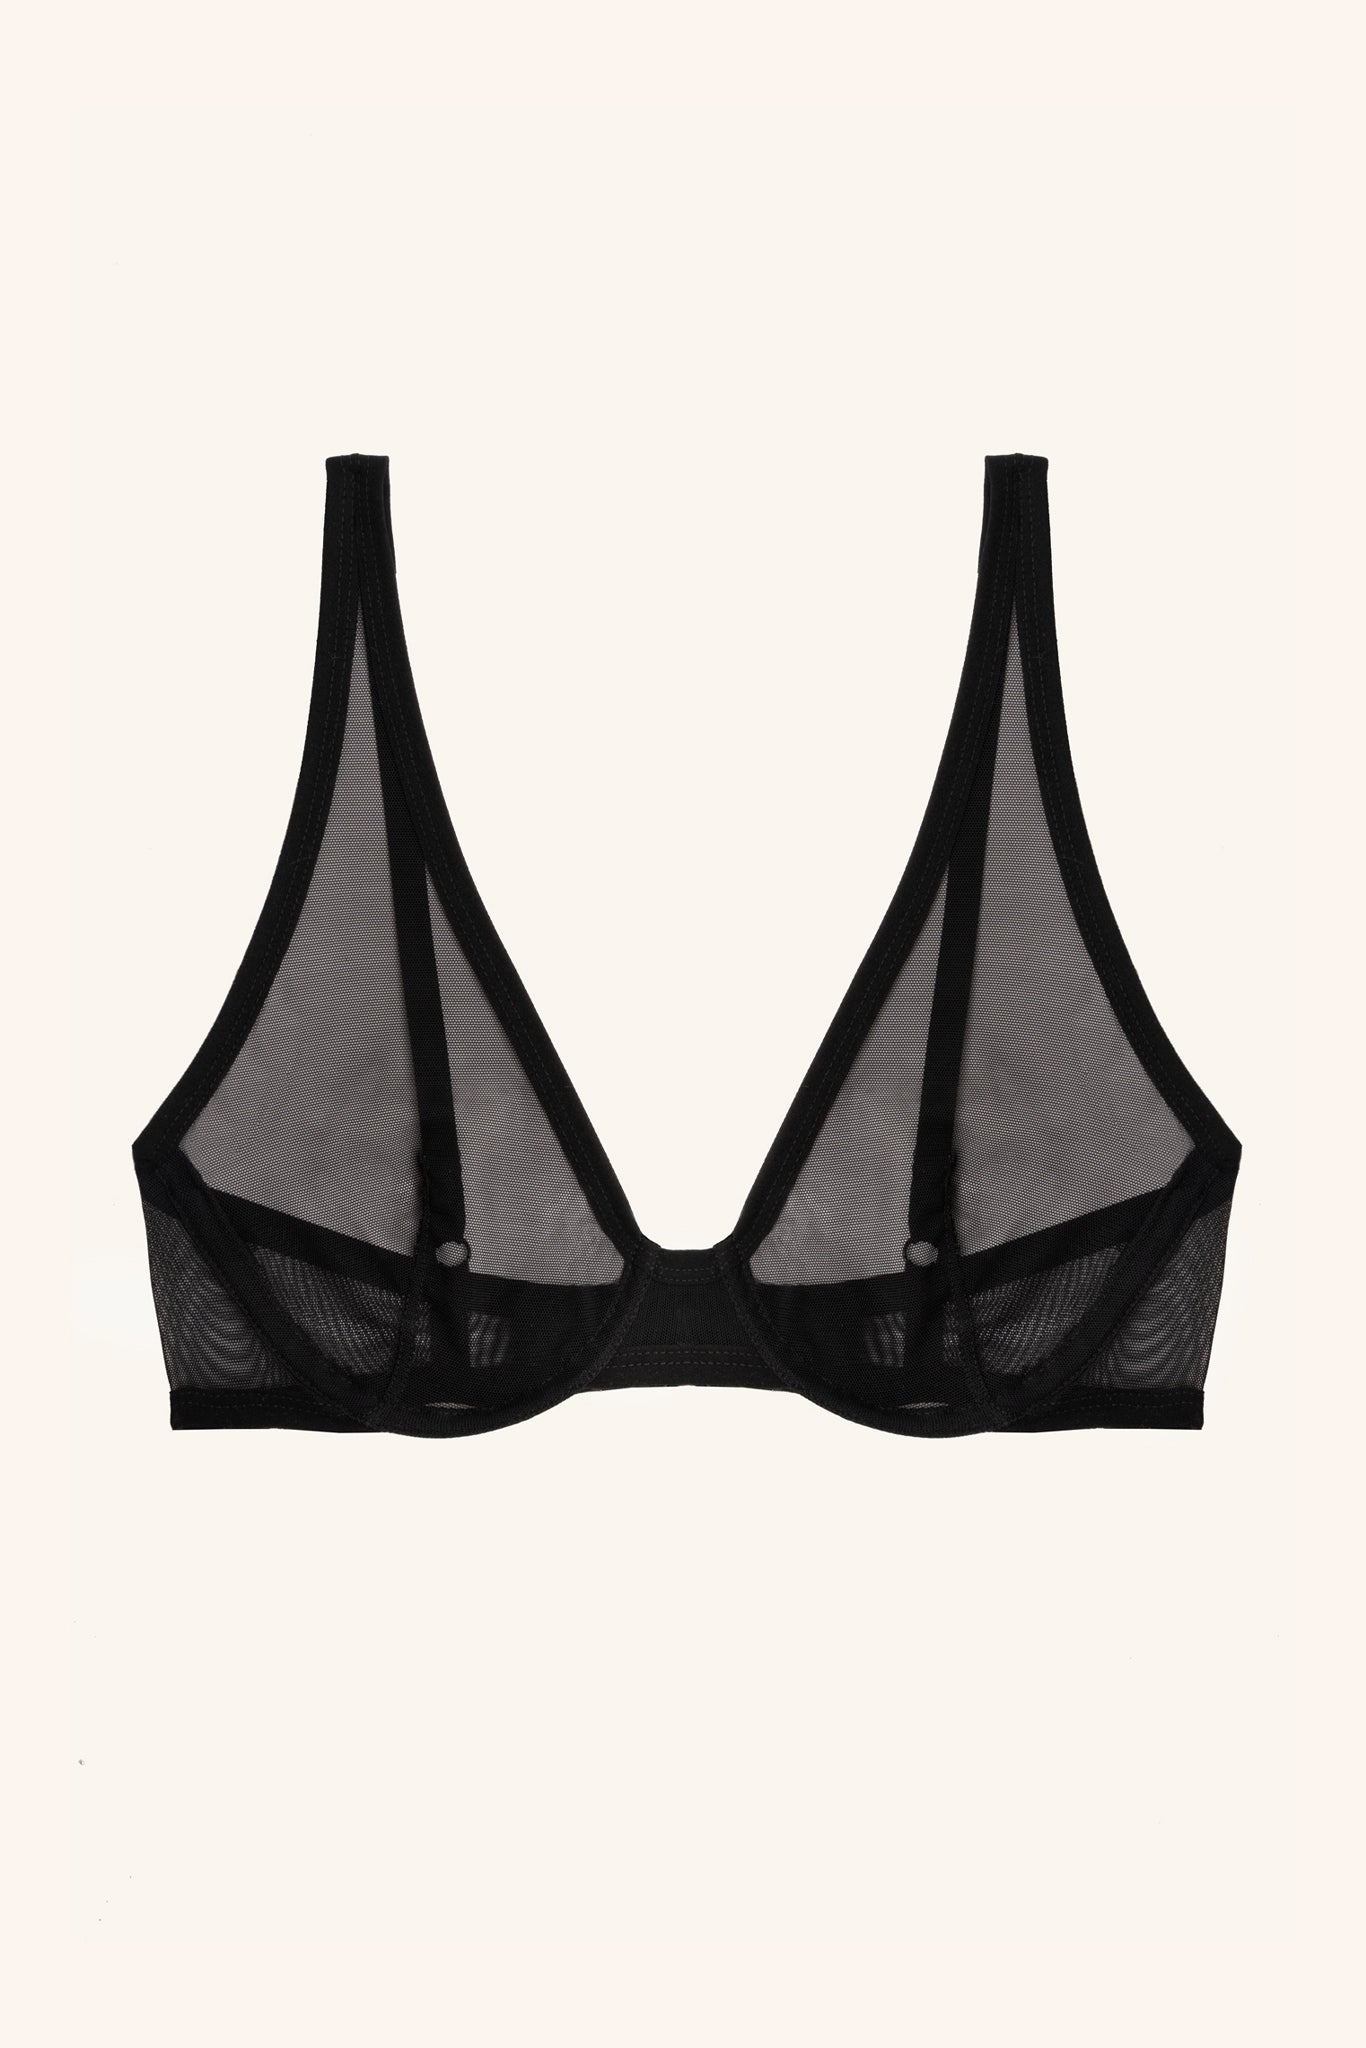 Buy Black Recycled Lace Full Cup Comfort Bra - 40G, Bras